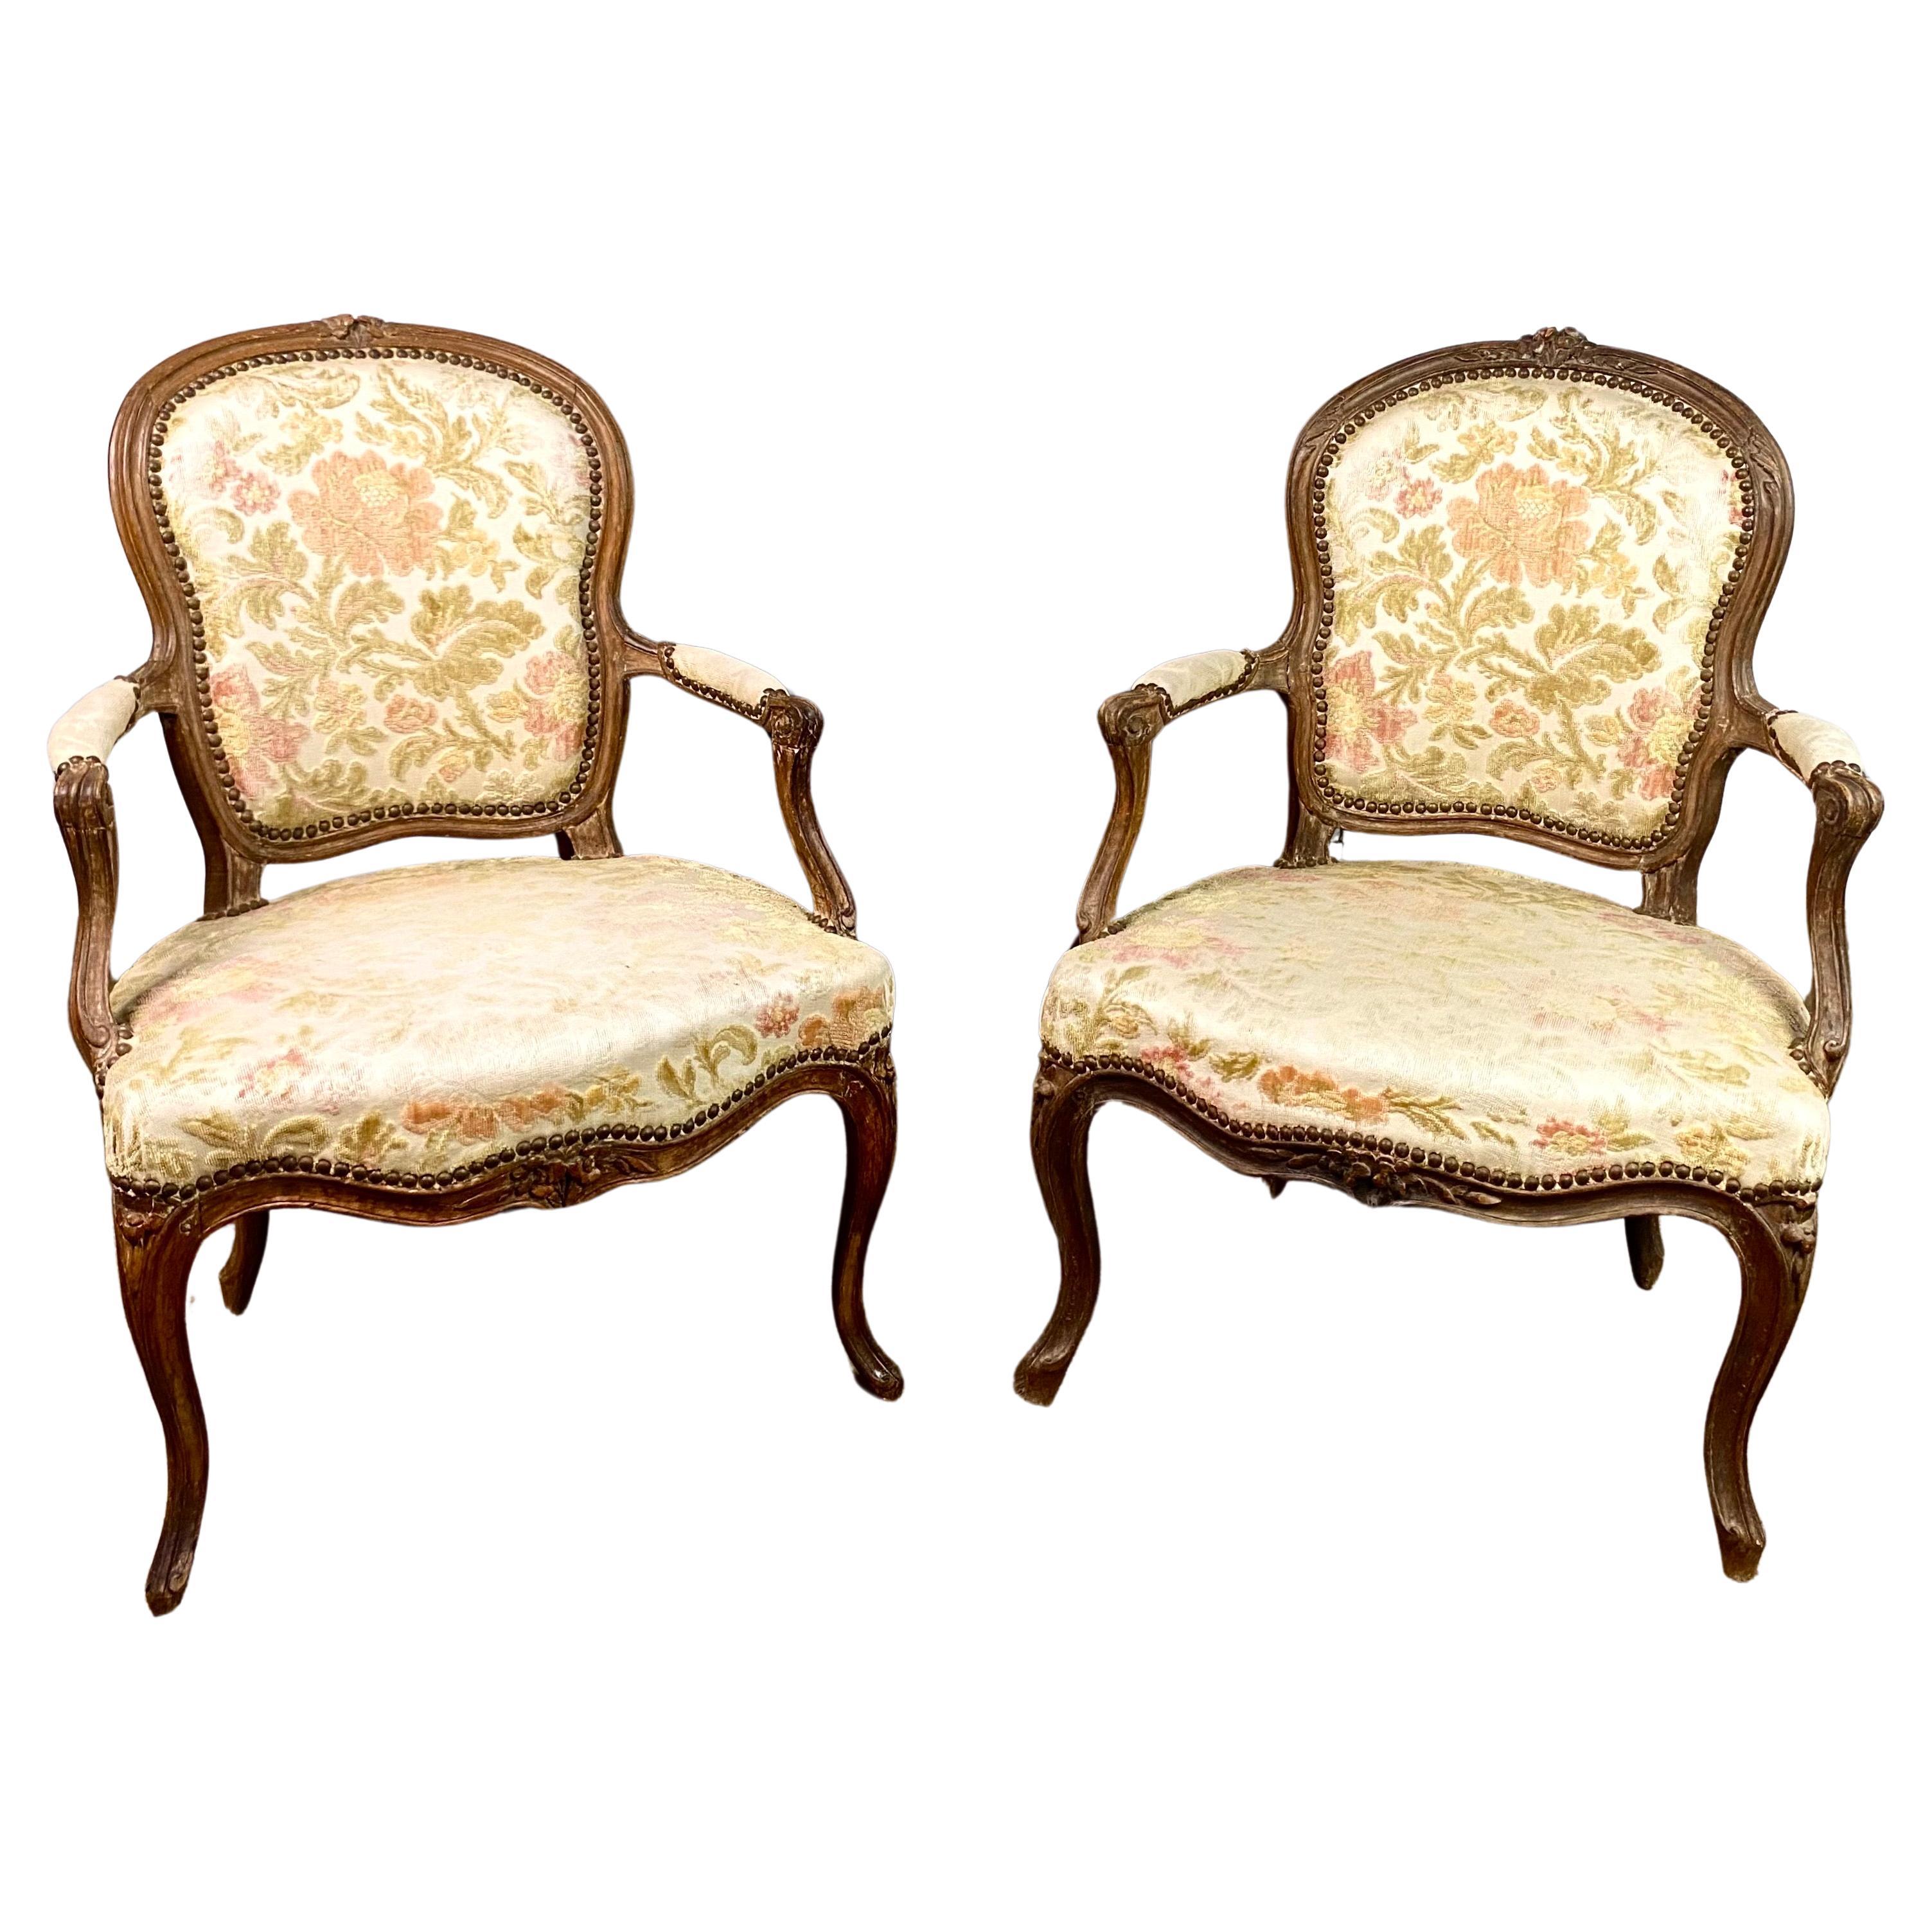 BLANCHARD - French Pair of Louis XV period Cabriolet Armchairs - Stamped - 18th For Sale